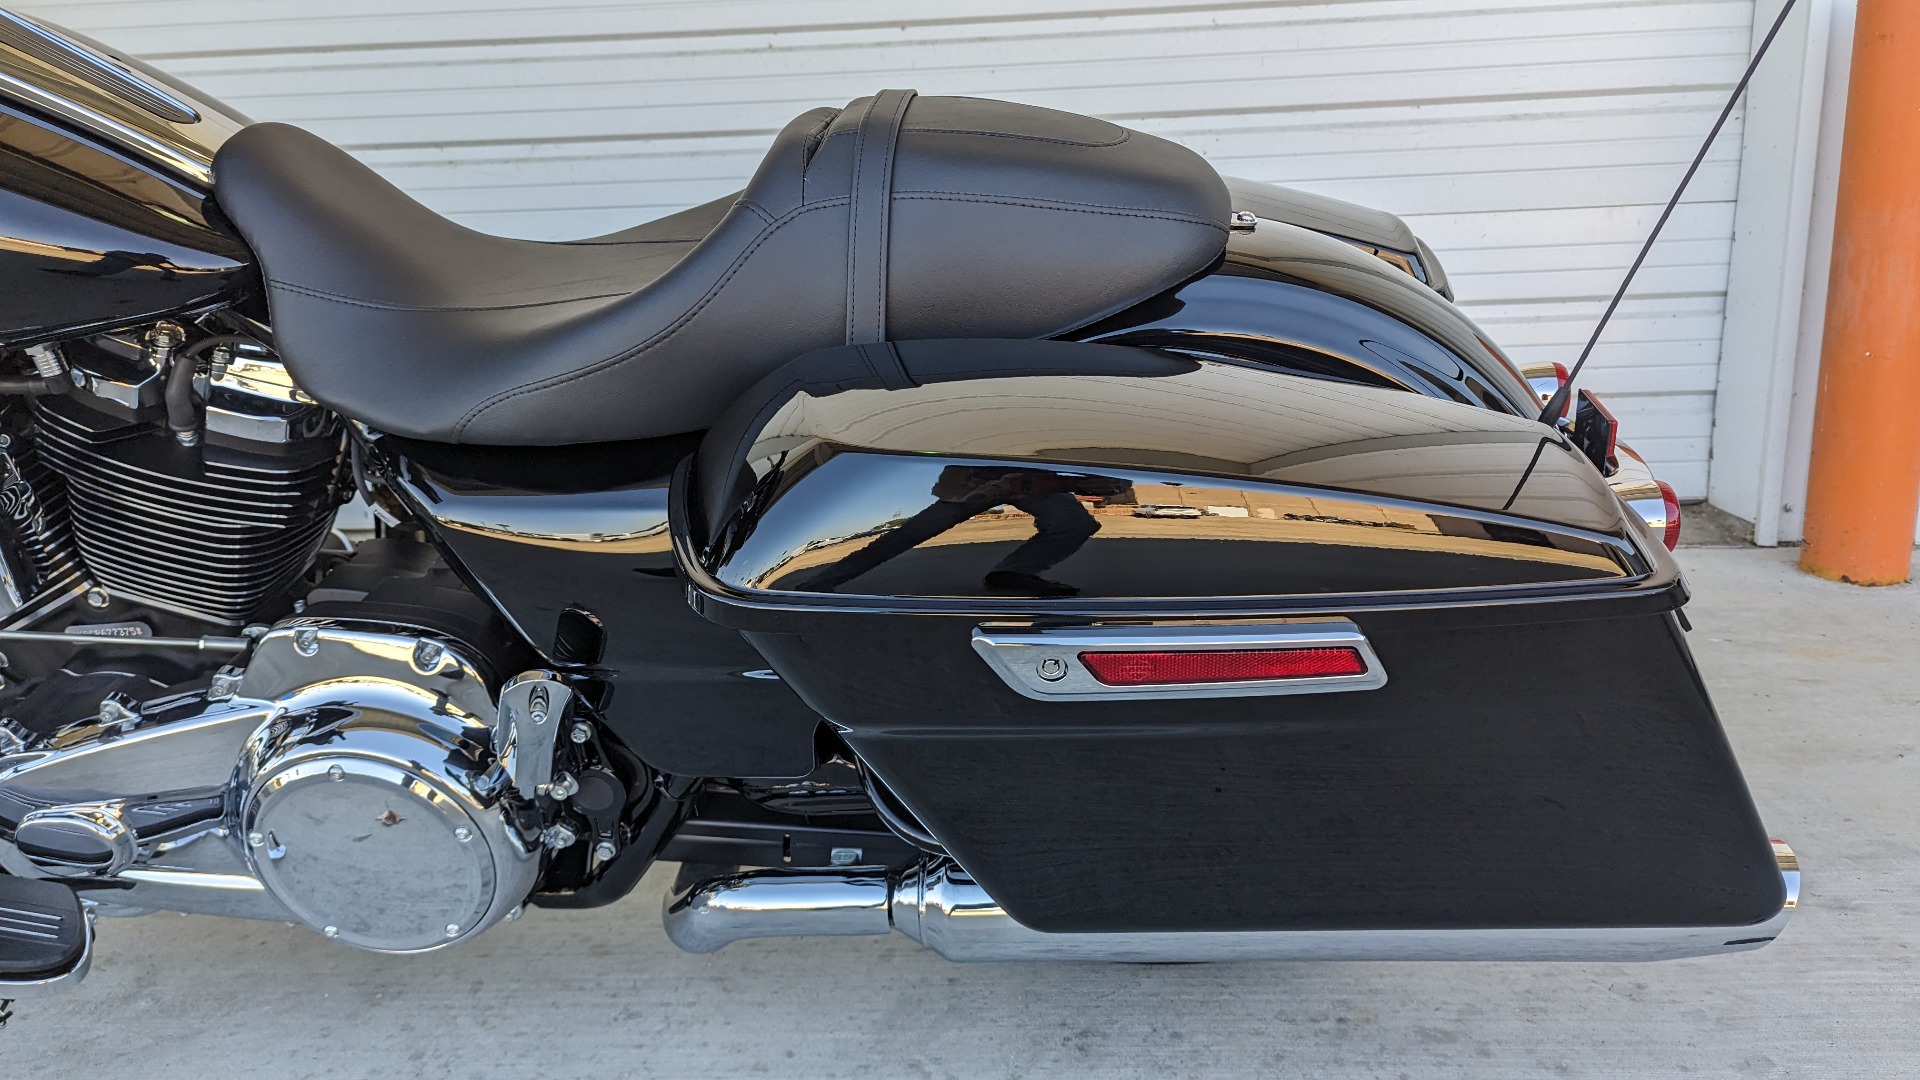 new 2023 harley davidson street glide black and chrome for sale in mississippi - Photo 8